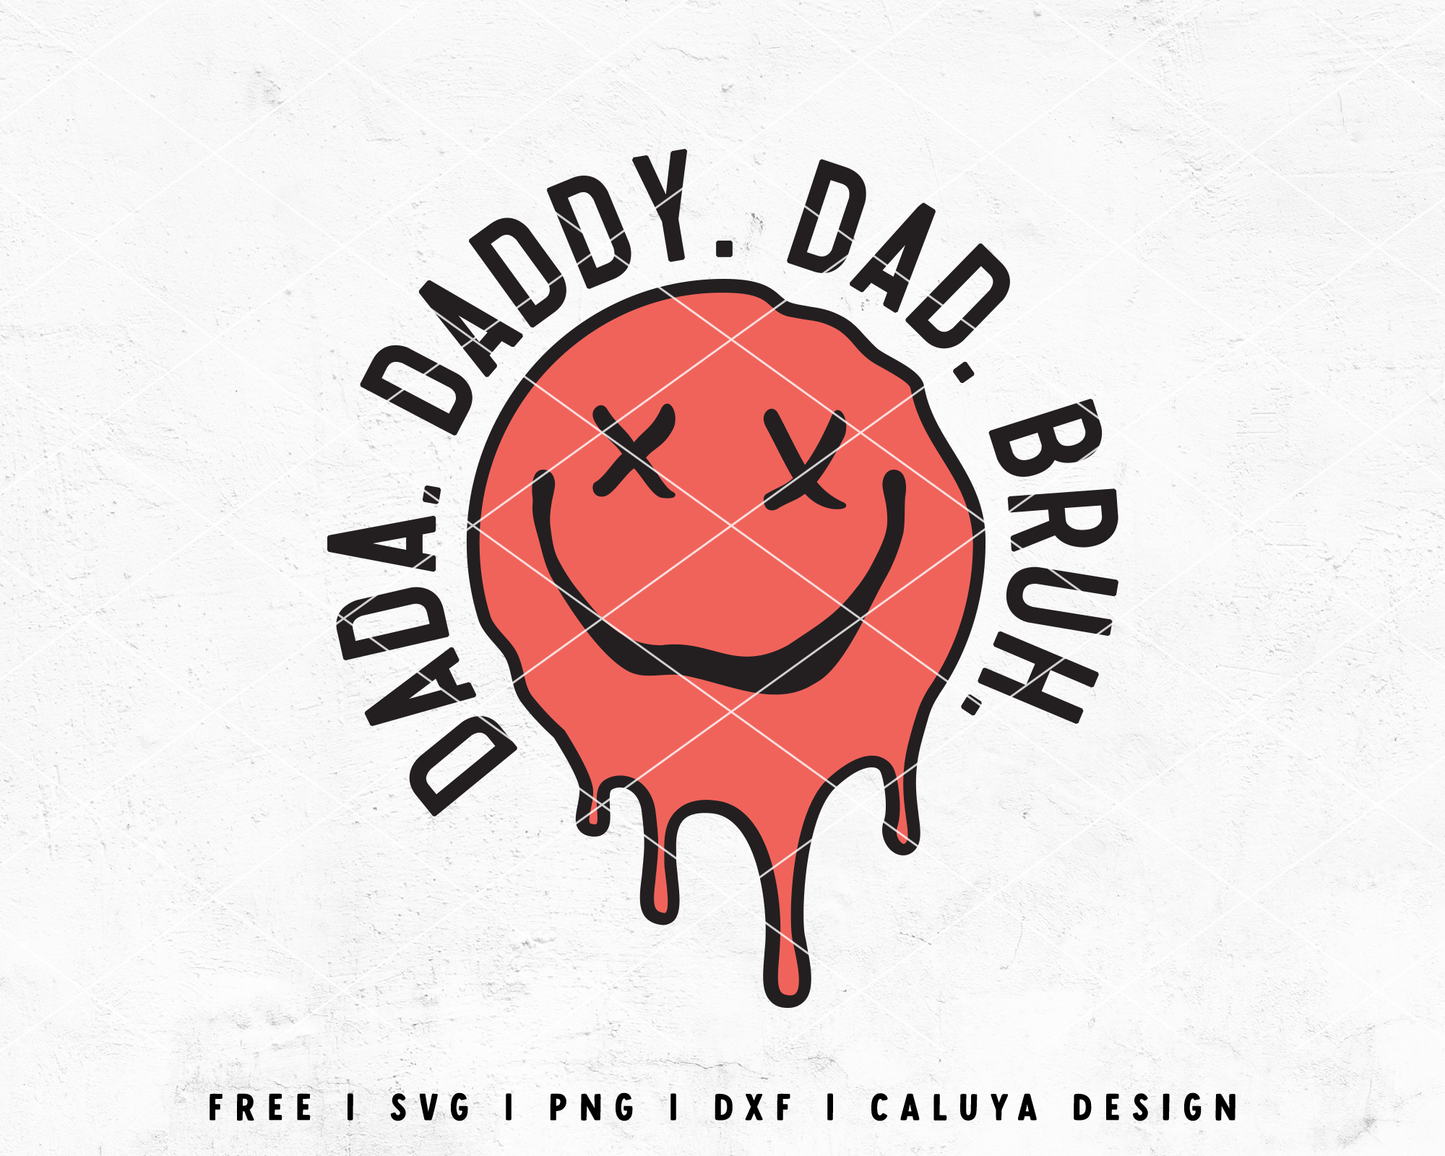 FREE Father's Day SVG | Dada. Dad. Daddy. Bruh SVG Cut File for Cricut, Cameo Silhouette | Free SVG Cut File